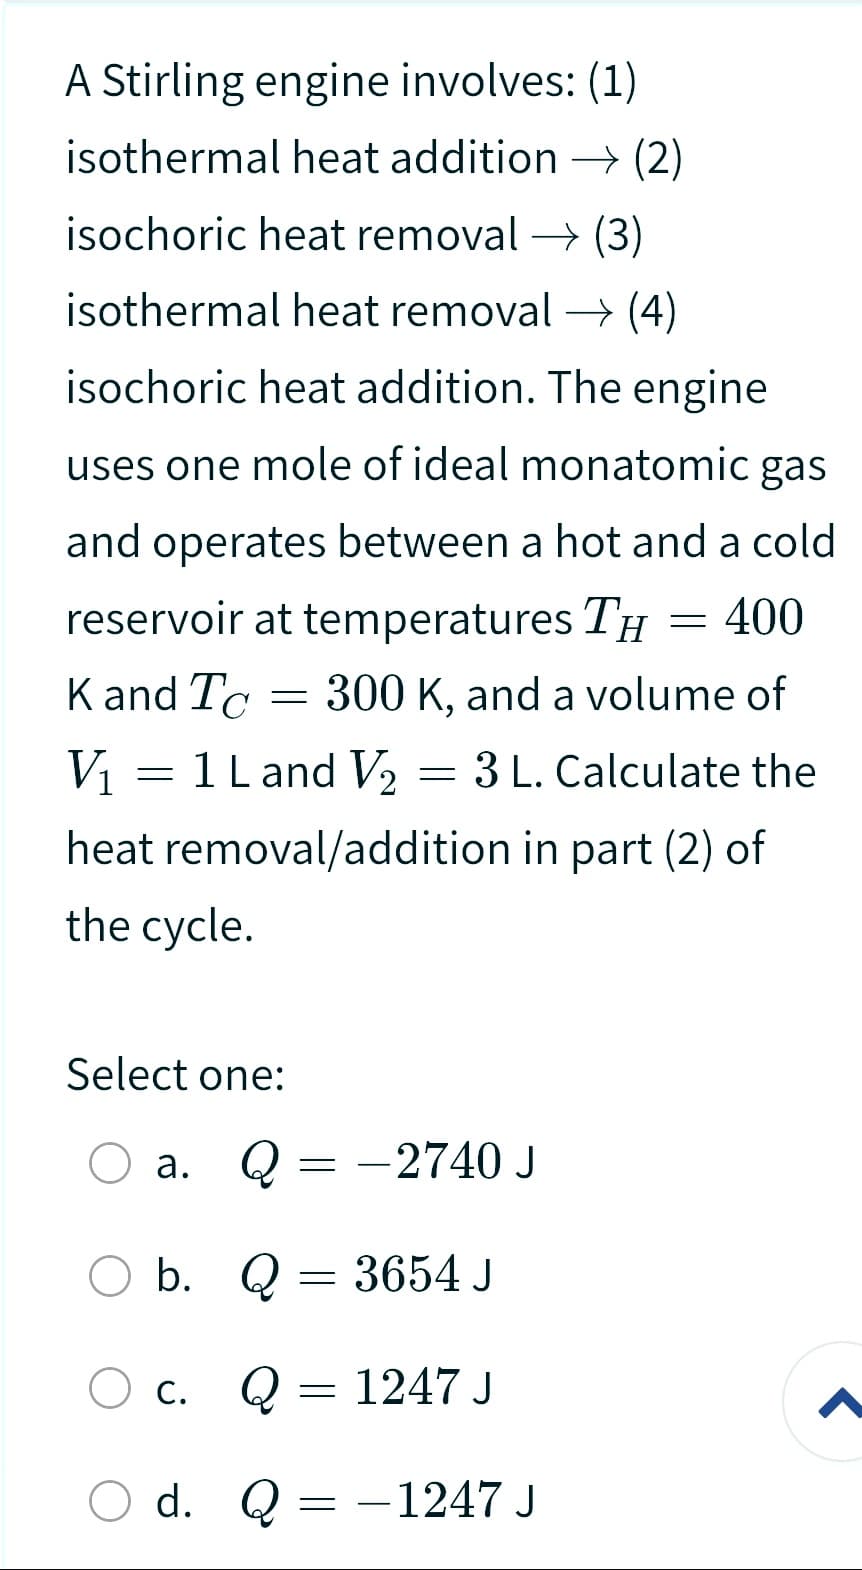 A Stirling engine involves: (1)
isothermal heat addition → (2)
isochoric heat removal → (3)
isothermal heat removal → (4)
isochoric heat addition. The engine
uses one mole of ideal monatomic gas
and operates between a hot and a cold
reservoir at temperatures TH = 400
K and To= 300 K, and a volume of
V₁
= 1 L and V₂ = 3 L. Calculate the
heat removal/addition in part (2) of
the cycle.
Select one:
a.
O b.
b.
C.
Q = -2740 J
Q
=
d. Q
Q = 1247 J
3654 J
=
- 1247 J